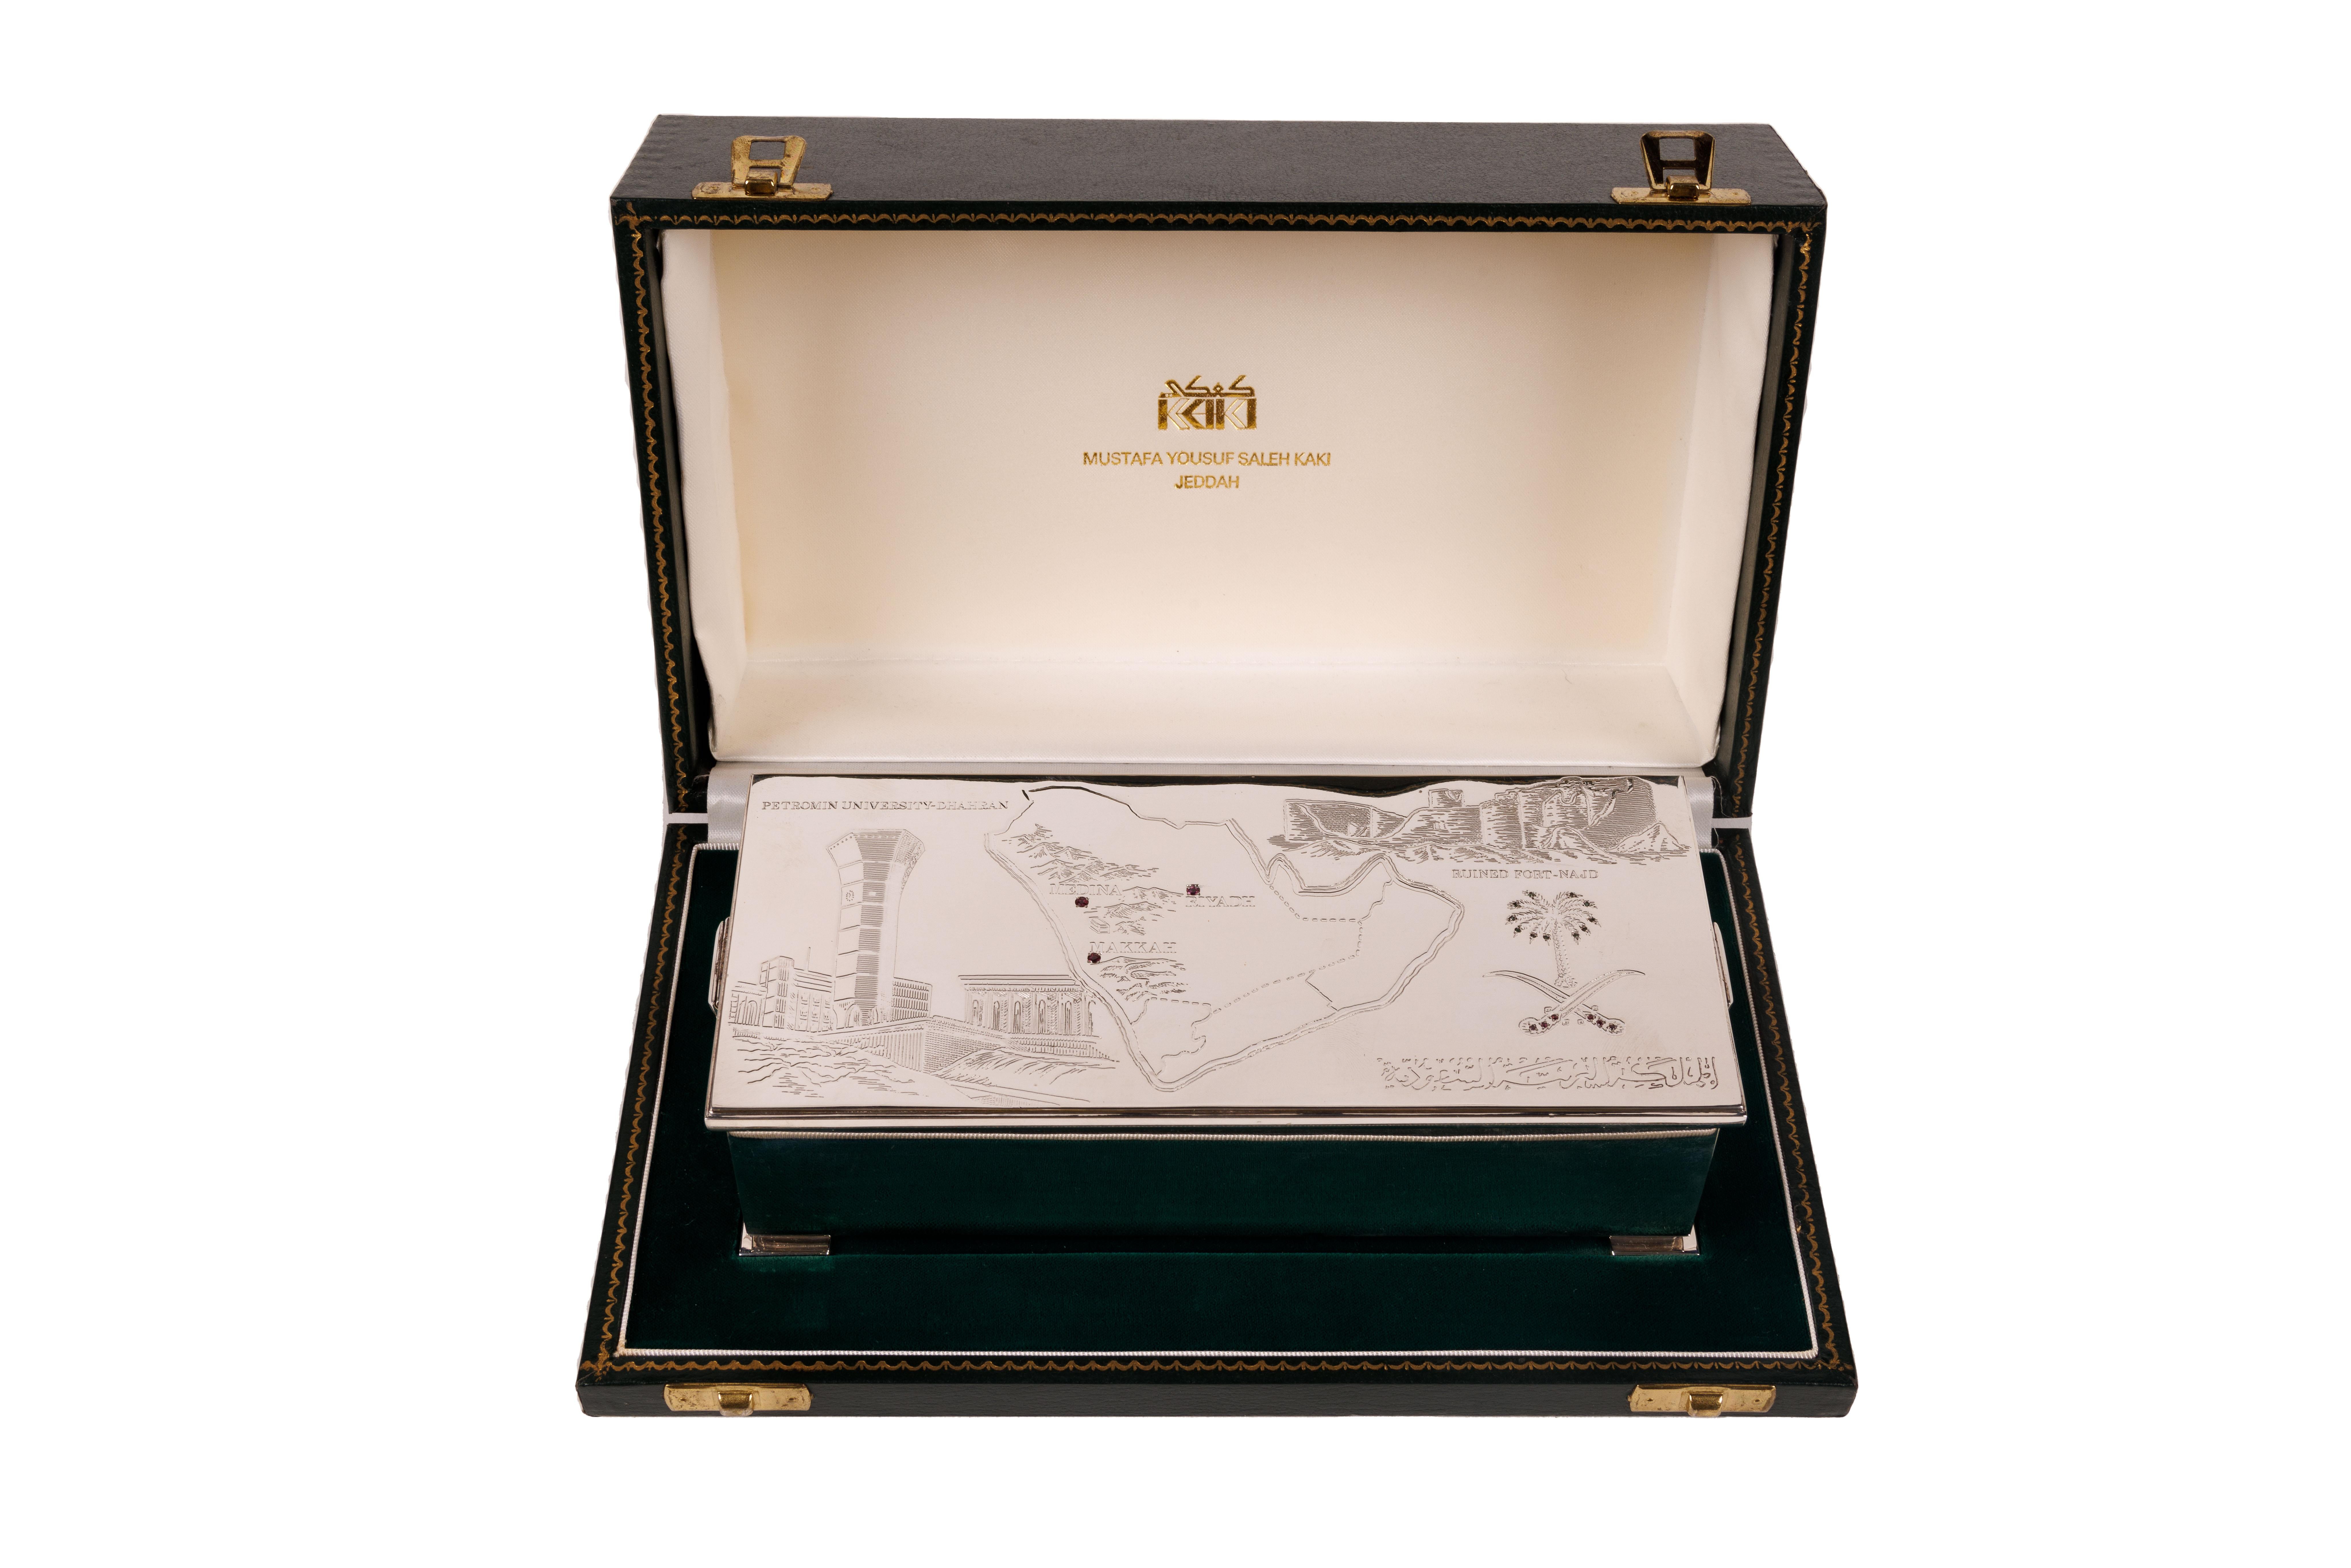 Elizabeth II Sterling Silver and Ruby Humidor Box Made for Saudi Arabia

Made by Peter Nicholas & Co Ltd in London in 1989. Rectangular box with corner bracket supports and hinged open scroll end handles. The top cover is engraved with map of